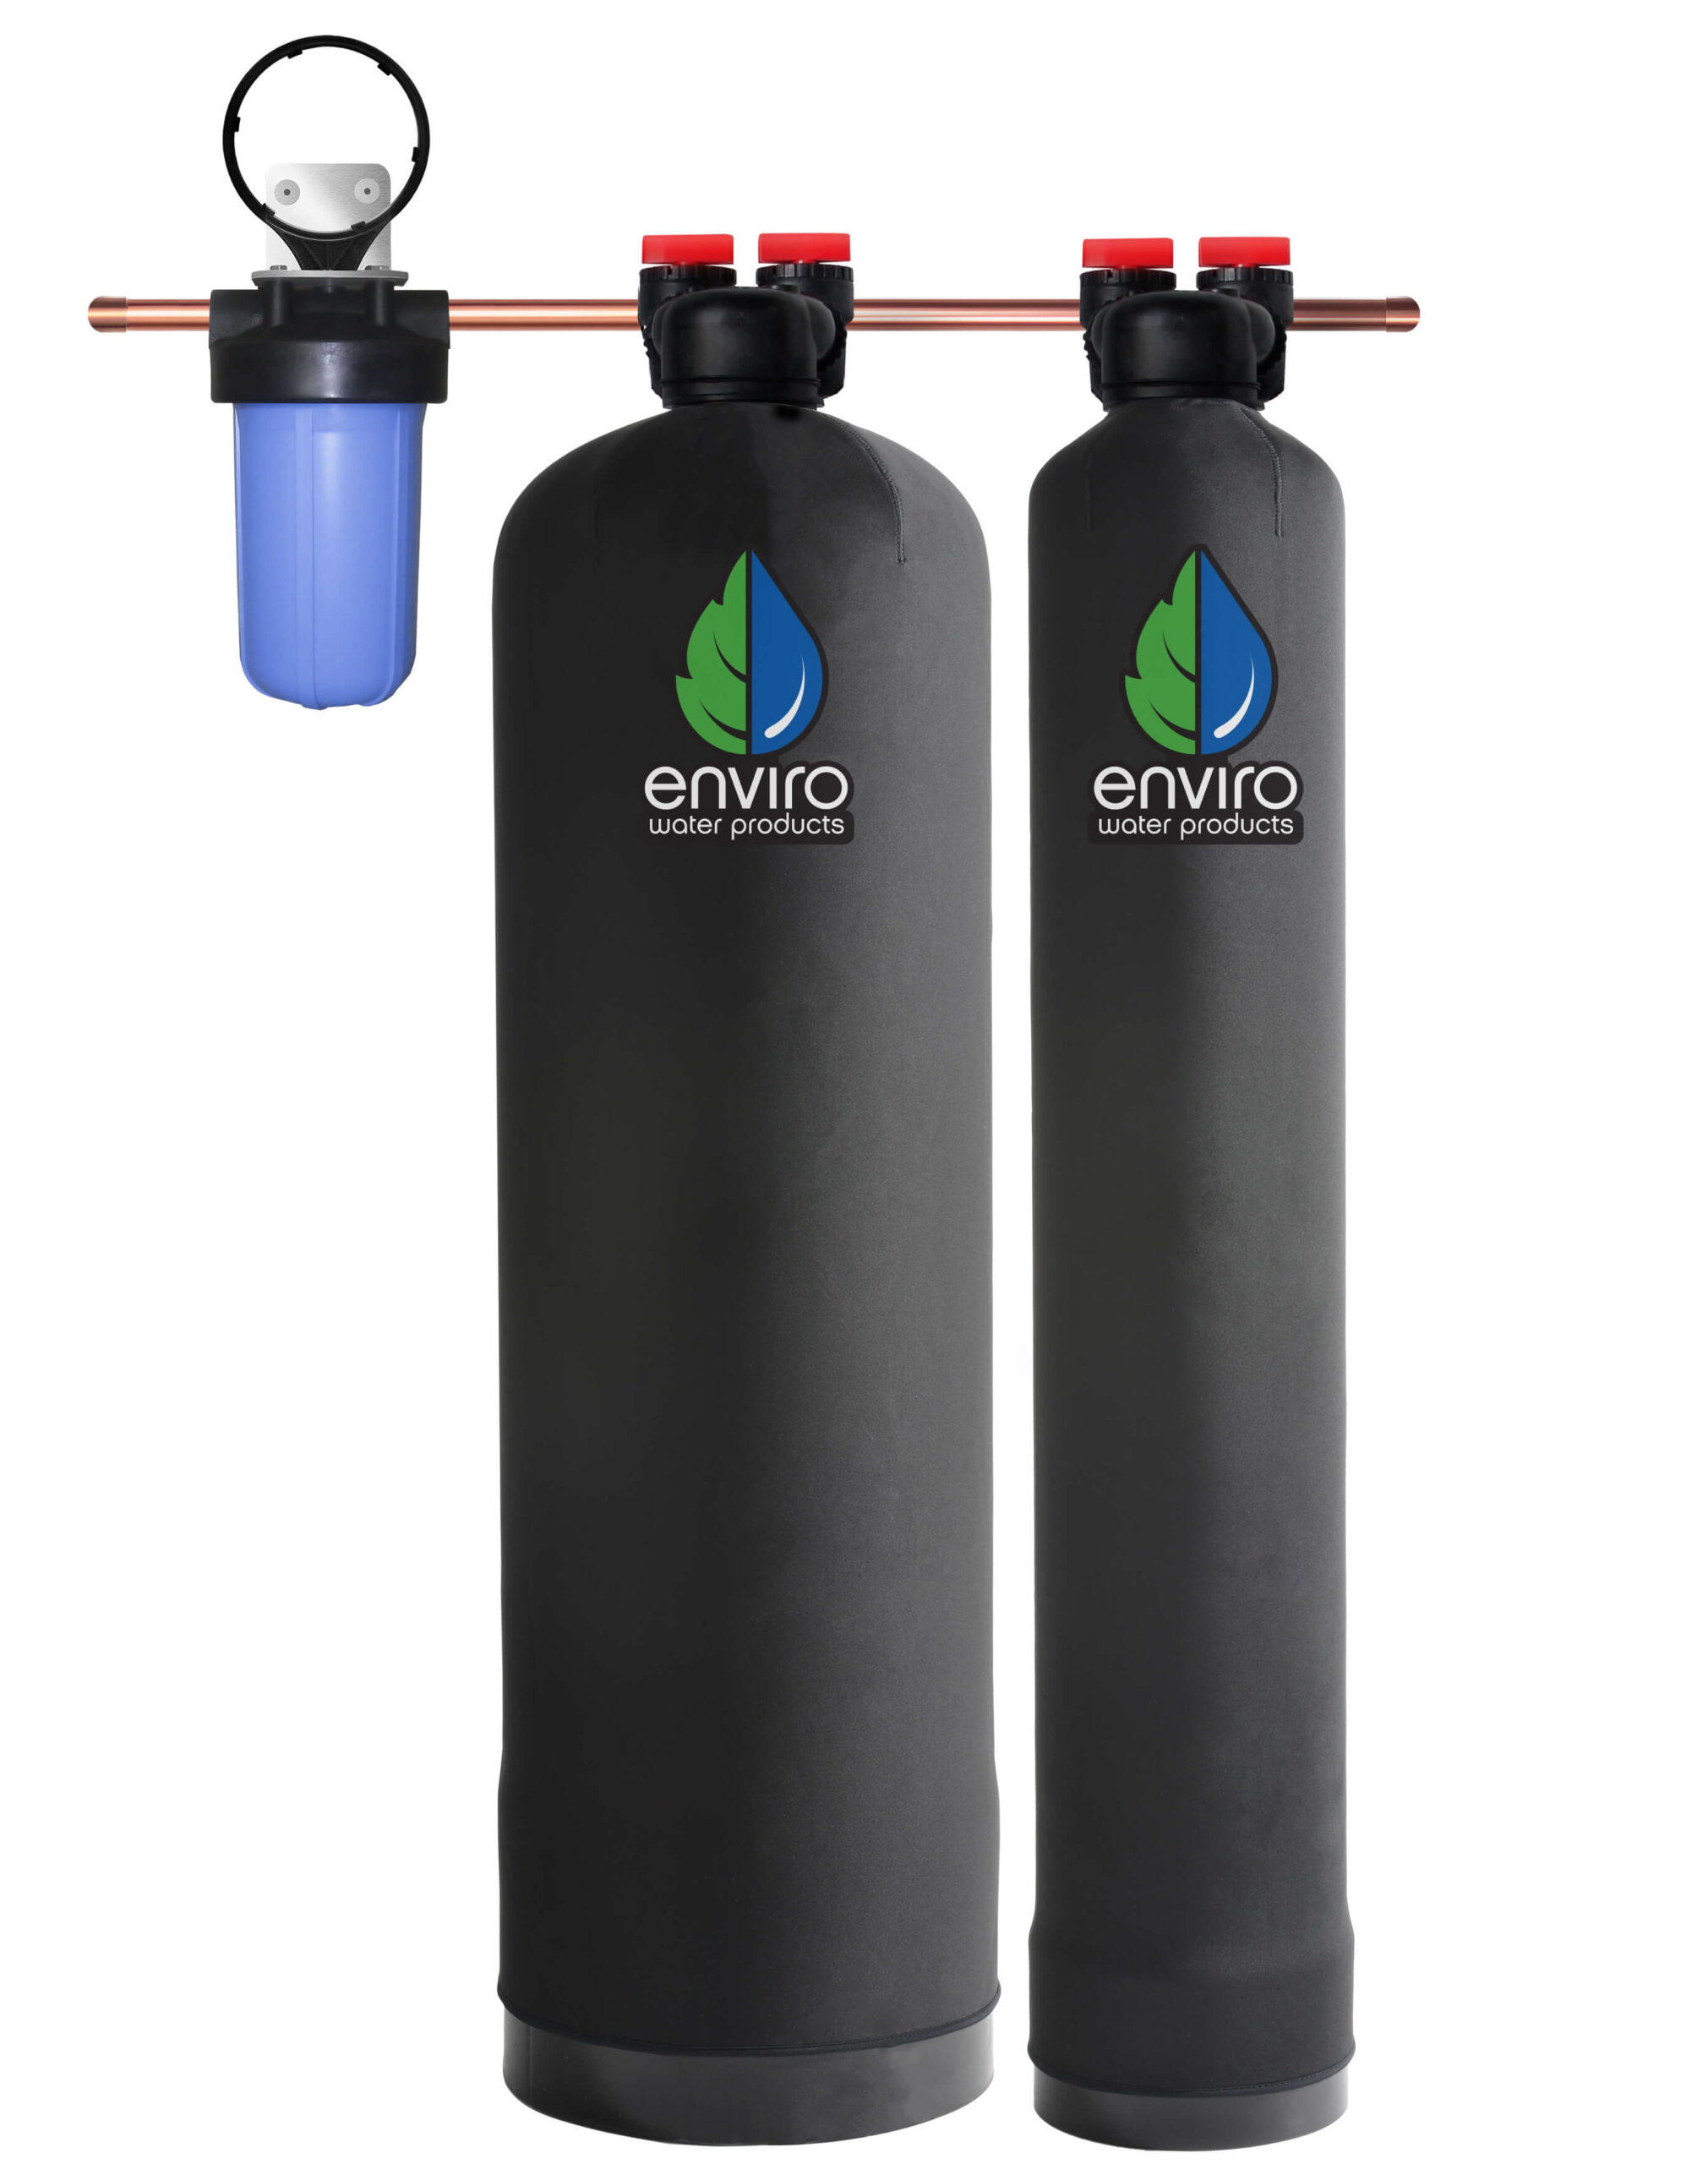 Enviro water products